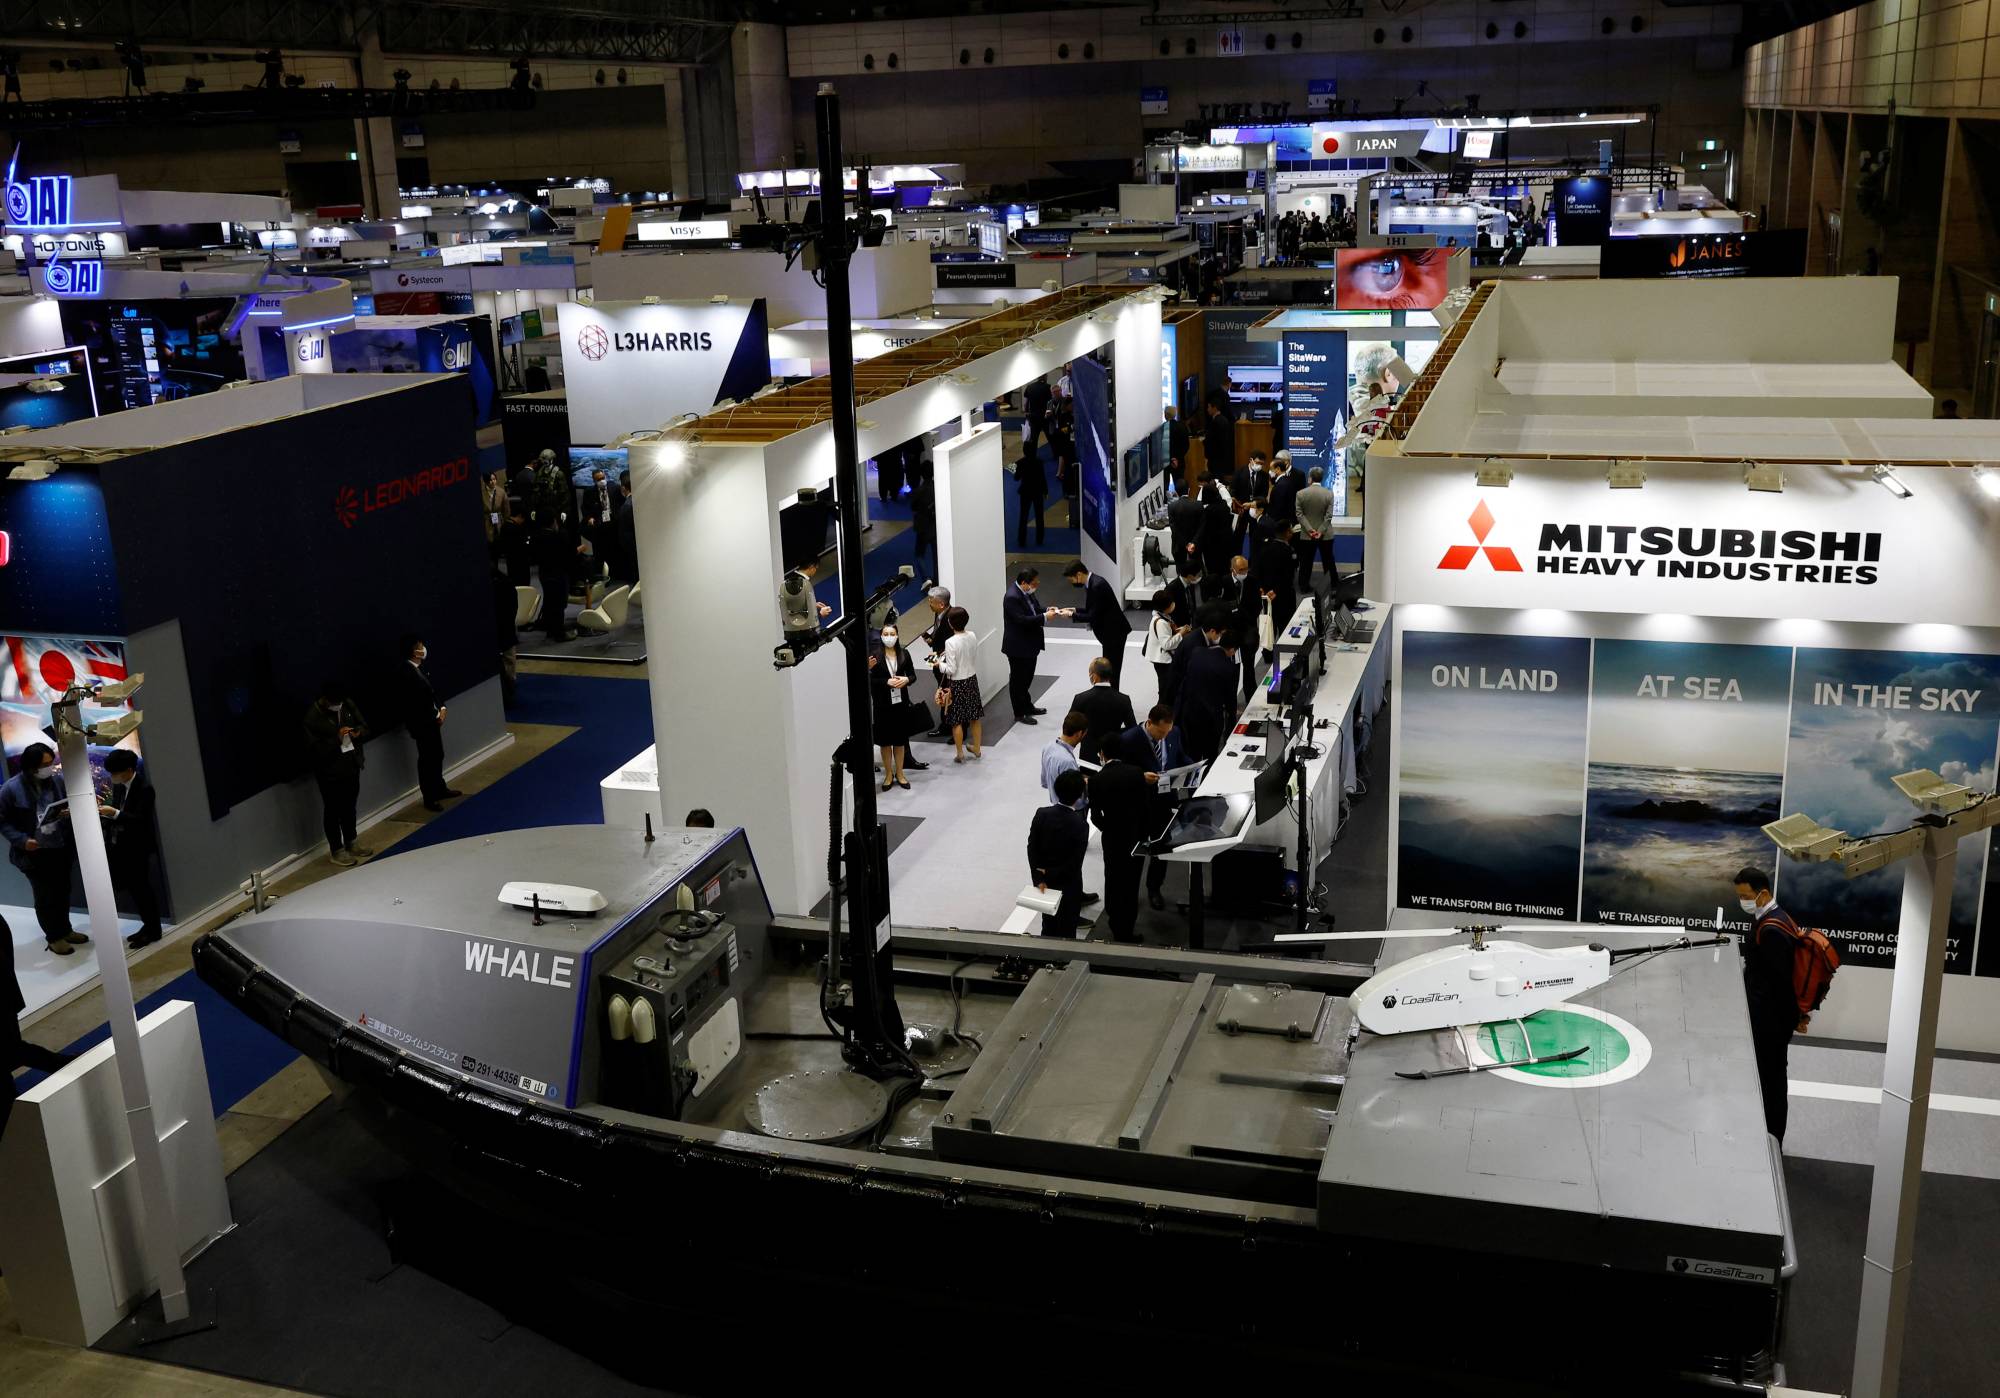 Mitsubishi Heavy Industries' unmanned surface vehicle is displayed at the DSEI Japan defense show at Makuhari Messe in Chiba on March 15. | REUTERS U.S. AMBASSADOR TO JAPAN RAHM EMANUEL VISITS THE DSEI JAPAN DEFENSE SHOW AT MAKUHARI MESSE IN CHIBA